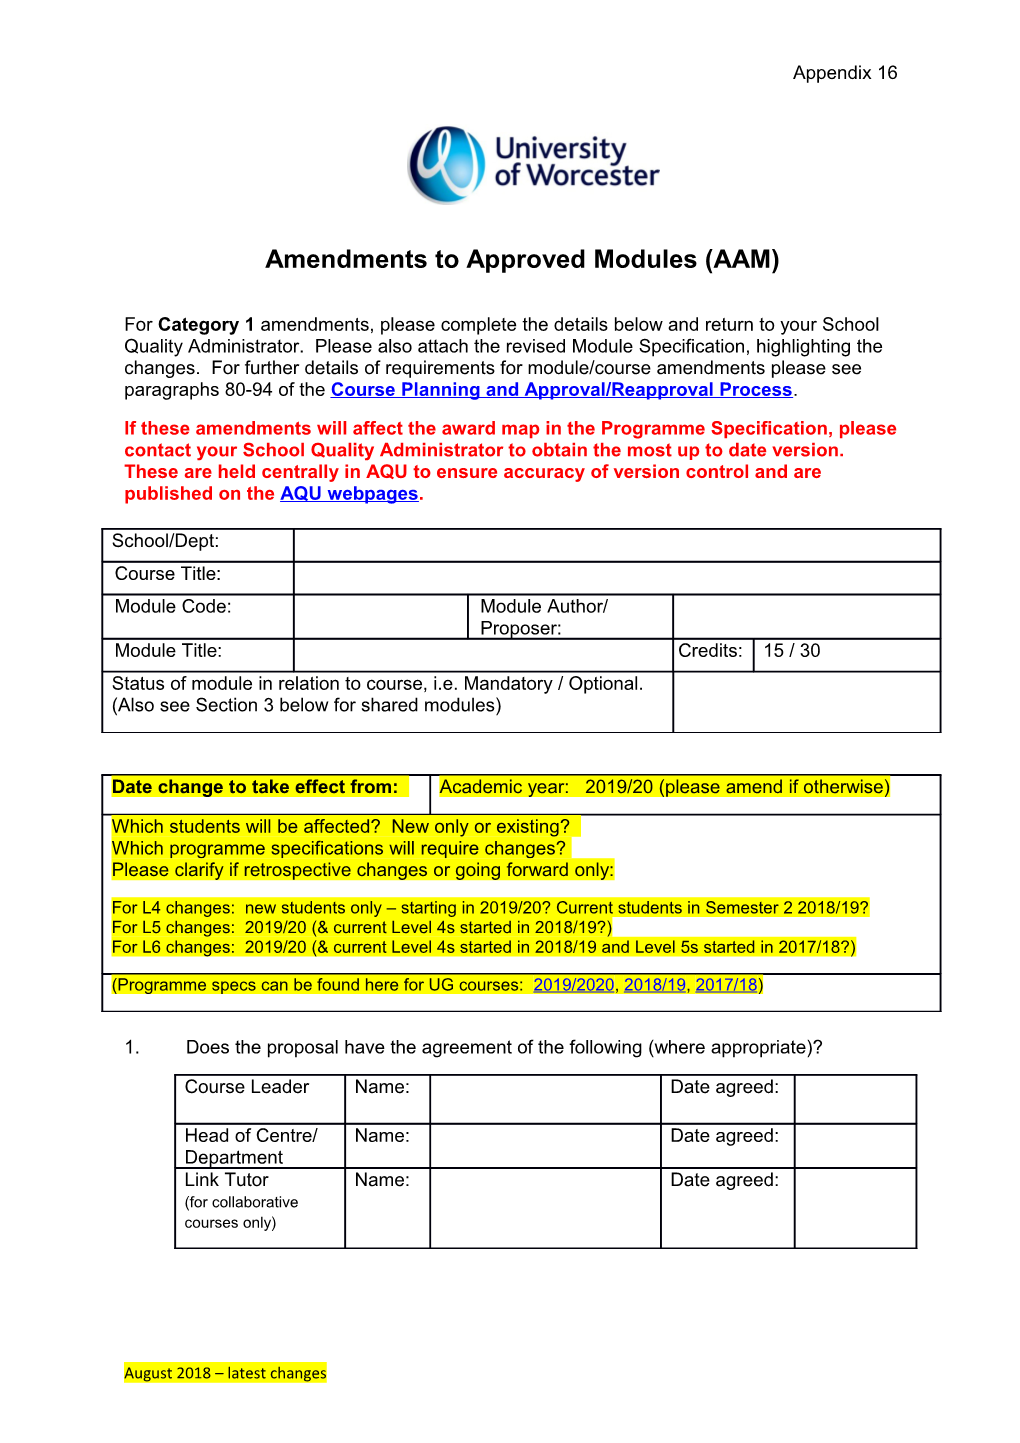 Amendments to Approved Modules (AAM)